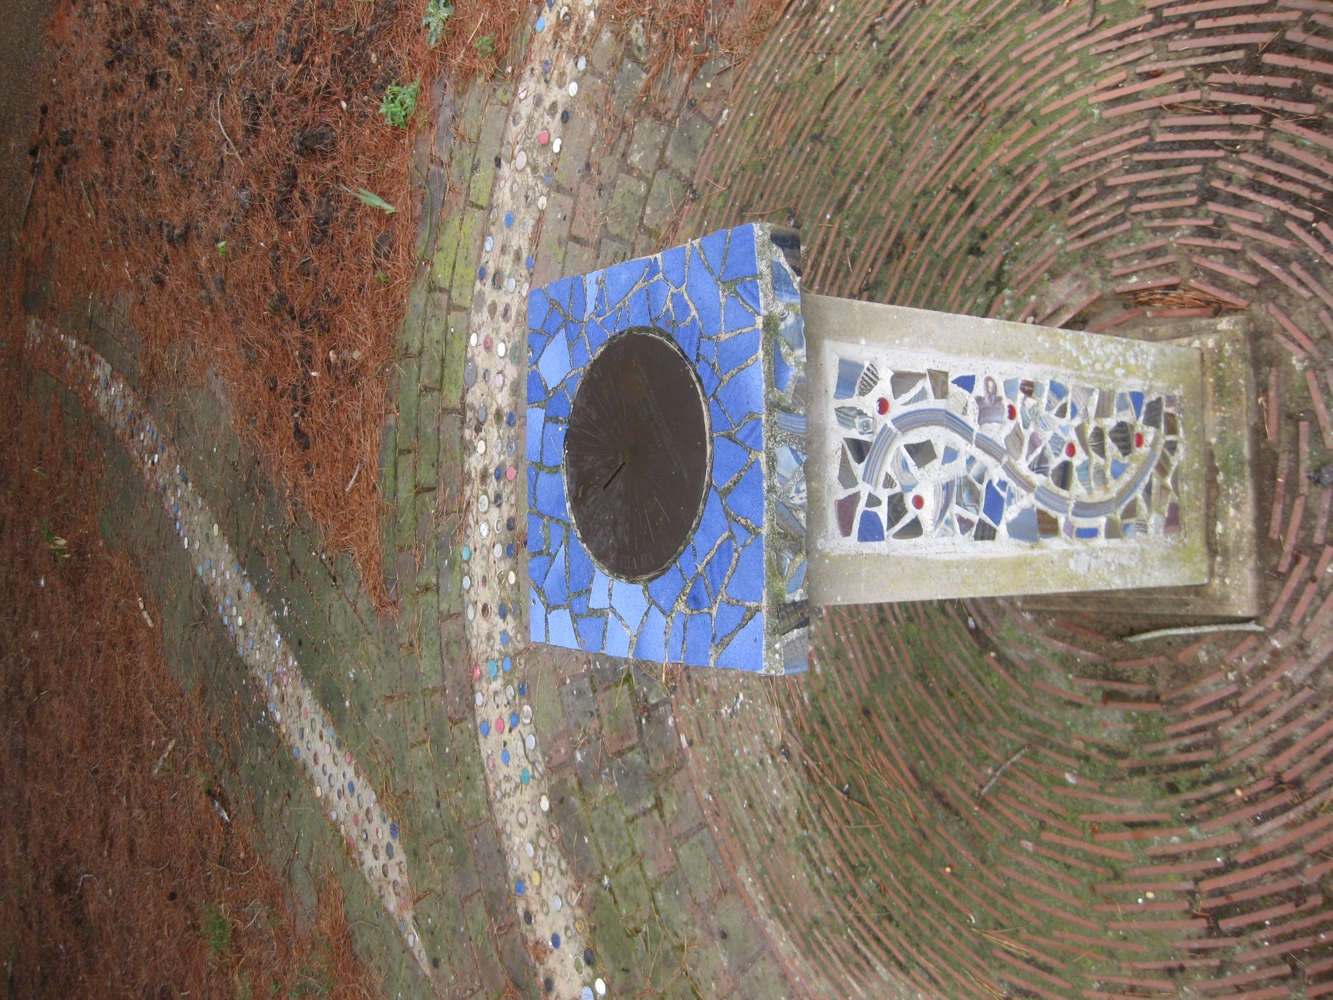 Stone plinth decorated with mosaic tiling, inside a mosaic circle